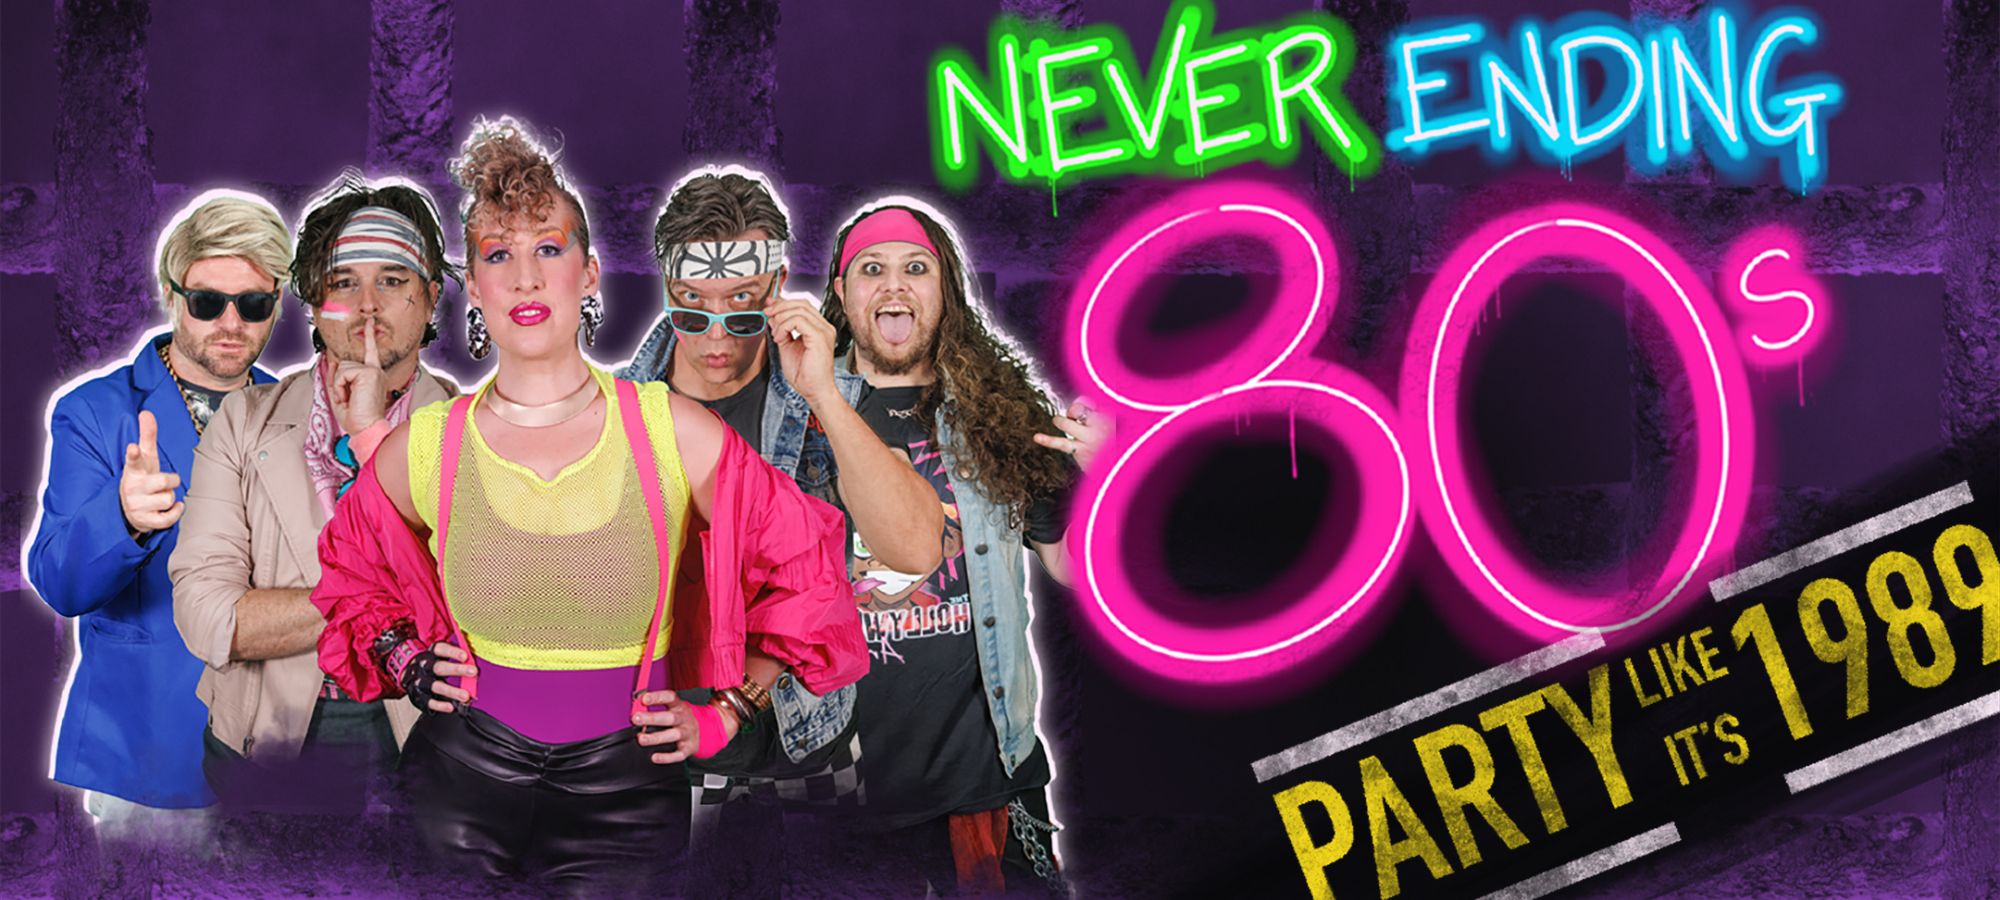 Never Ending 80’s – Party Like It’s 1989